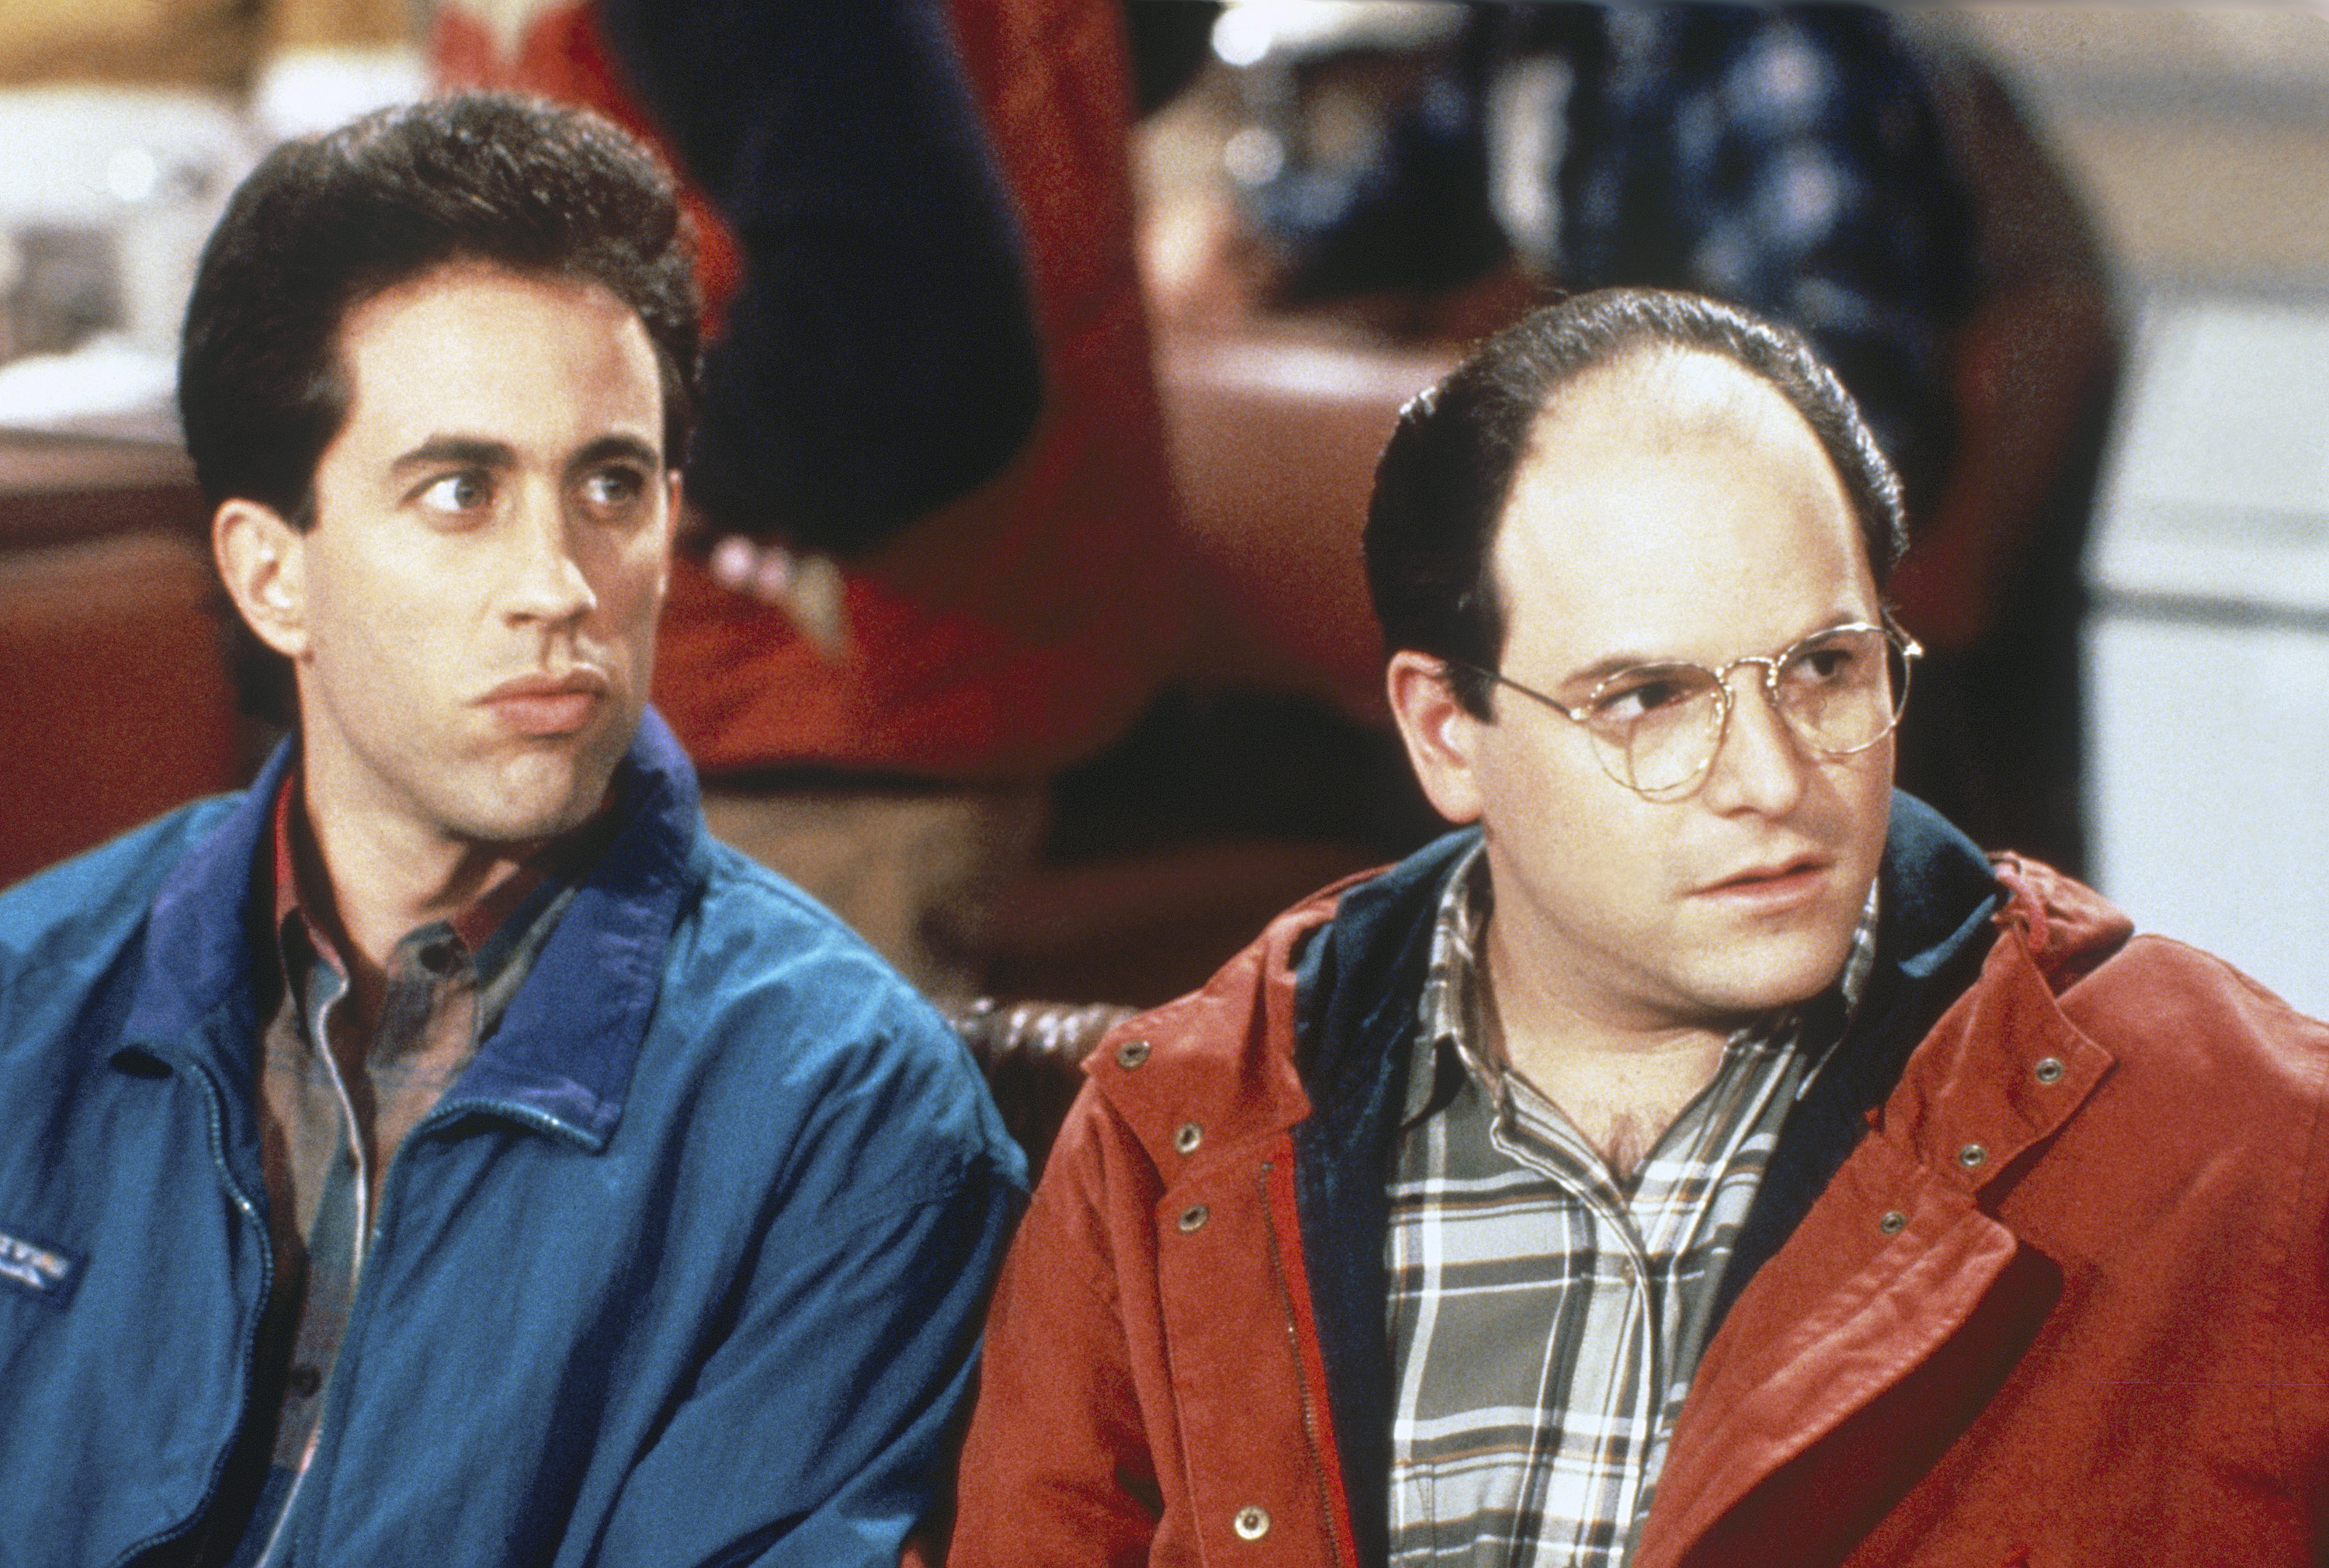 Jerry Seinfeld and George Costanza